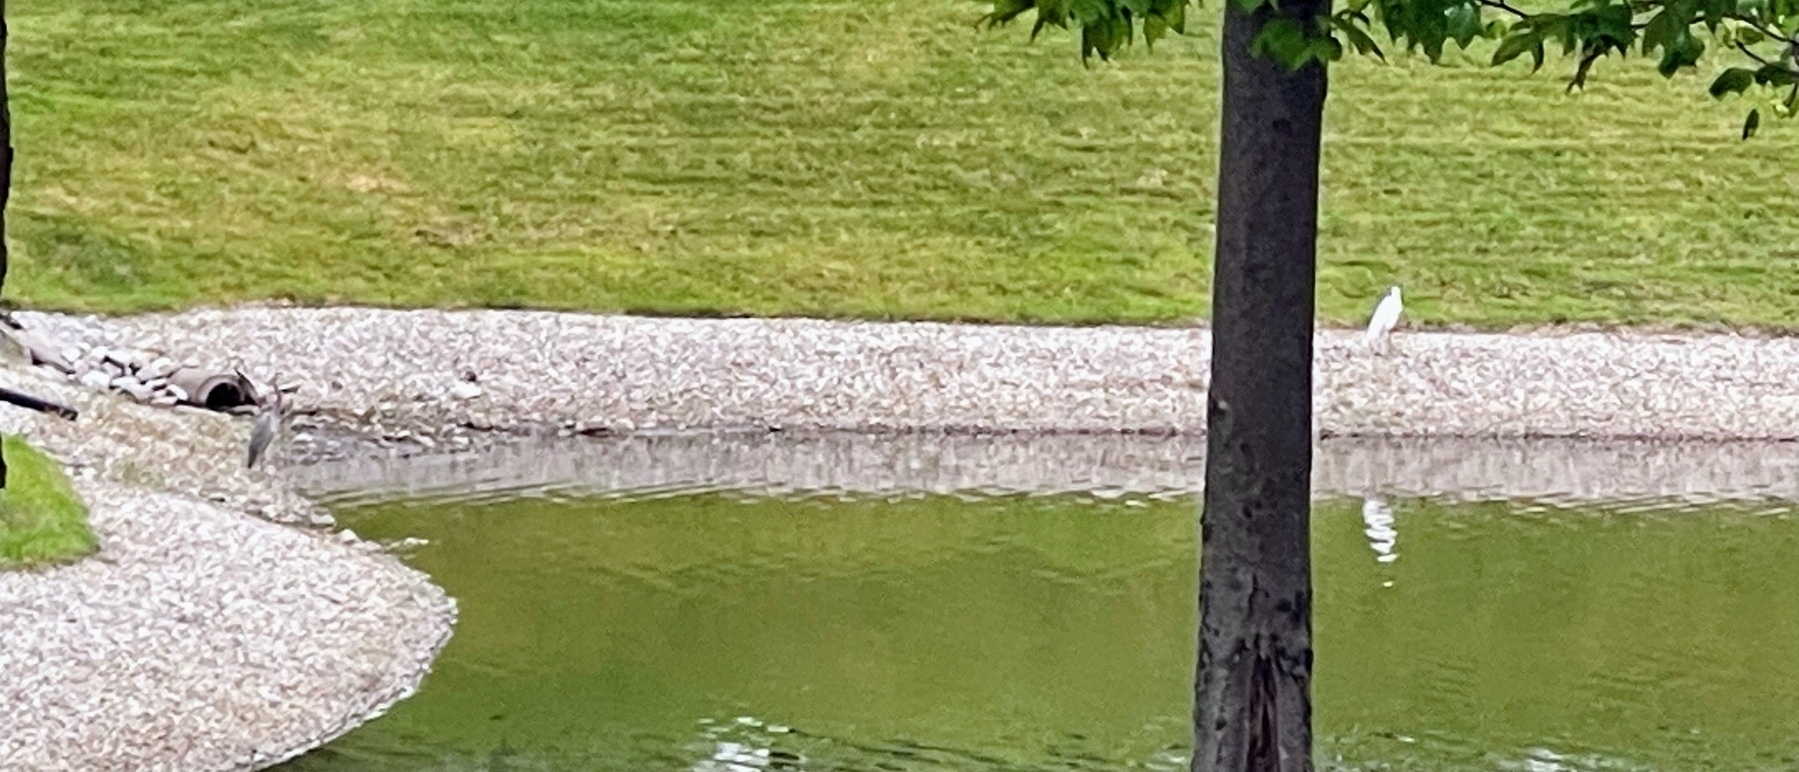 Two herons on a pond